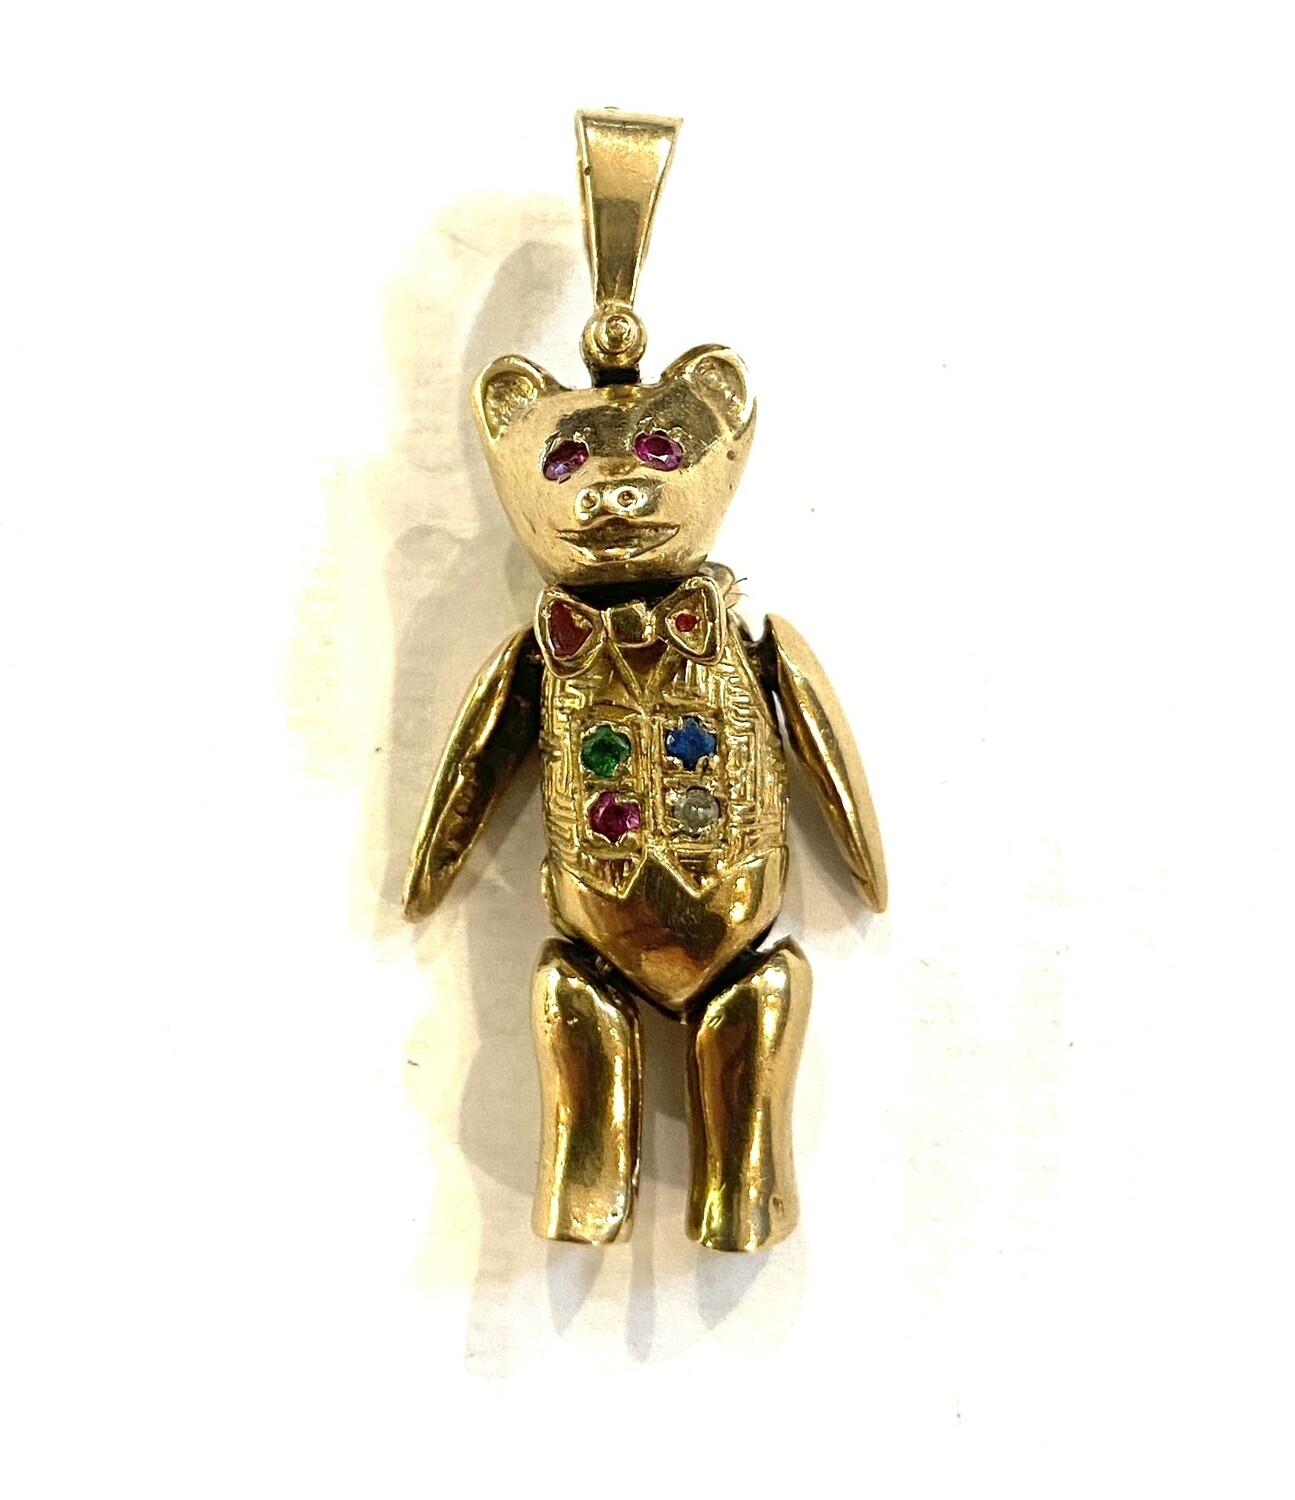 9ct teddy bear charm articulated and large